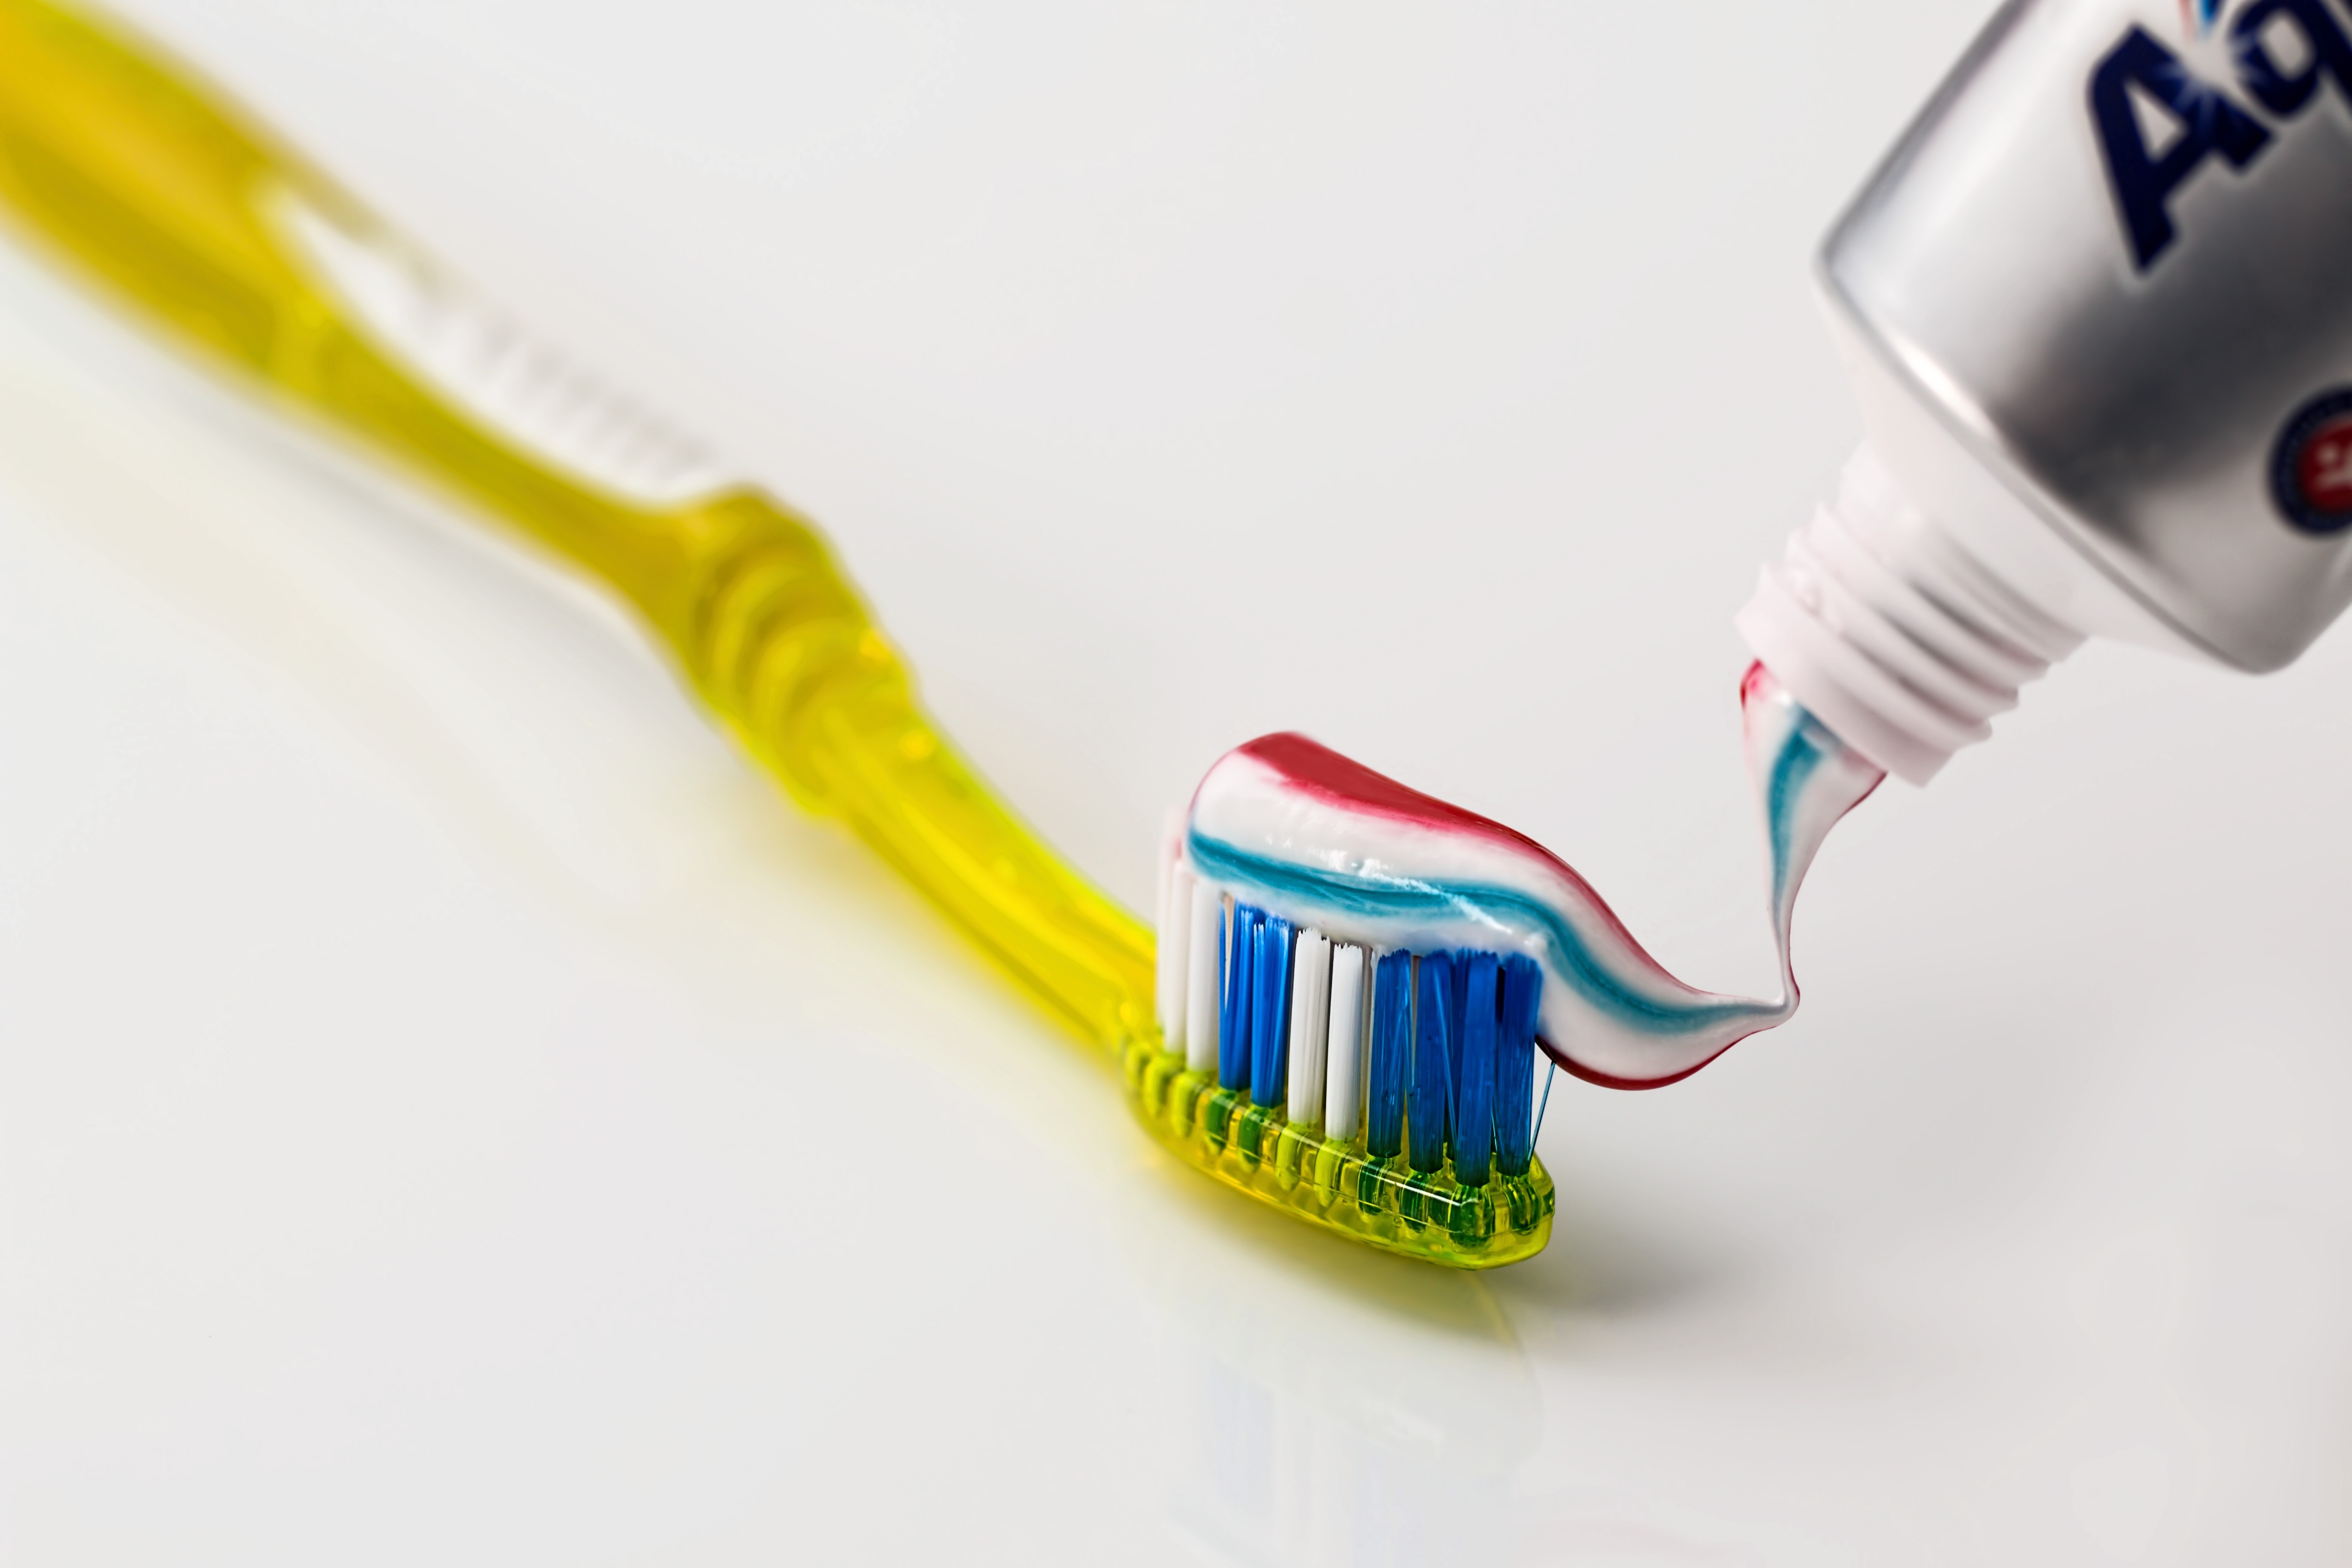 Toothpaste is squeezed onto the bristles of a yellow toothbrush